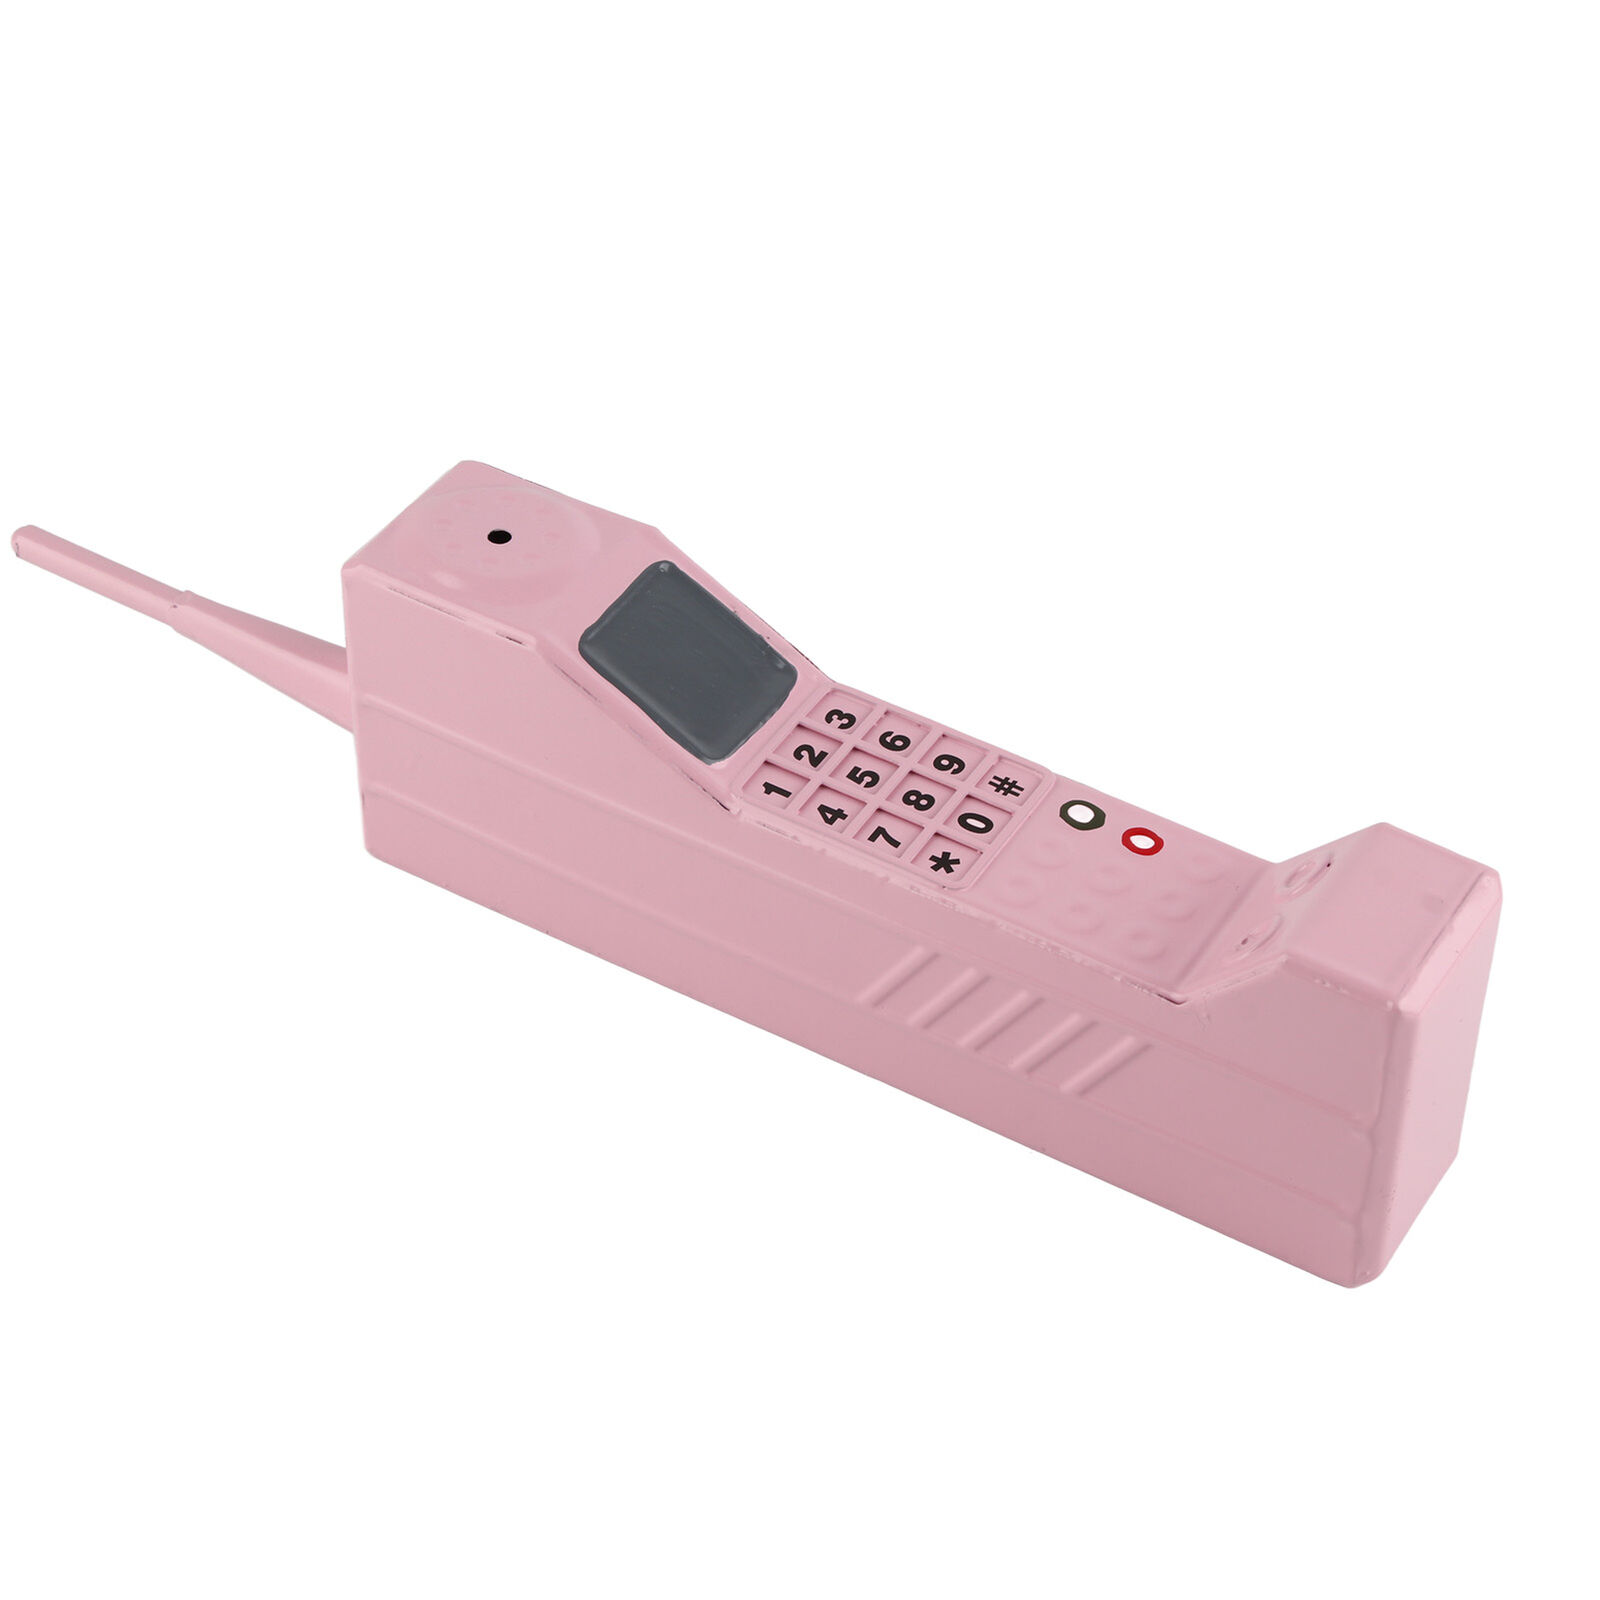 (Pink) Retro Mobile Phone 80'S 90'S Old Fashioned Portable Brick Cell